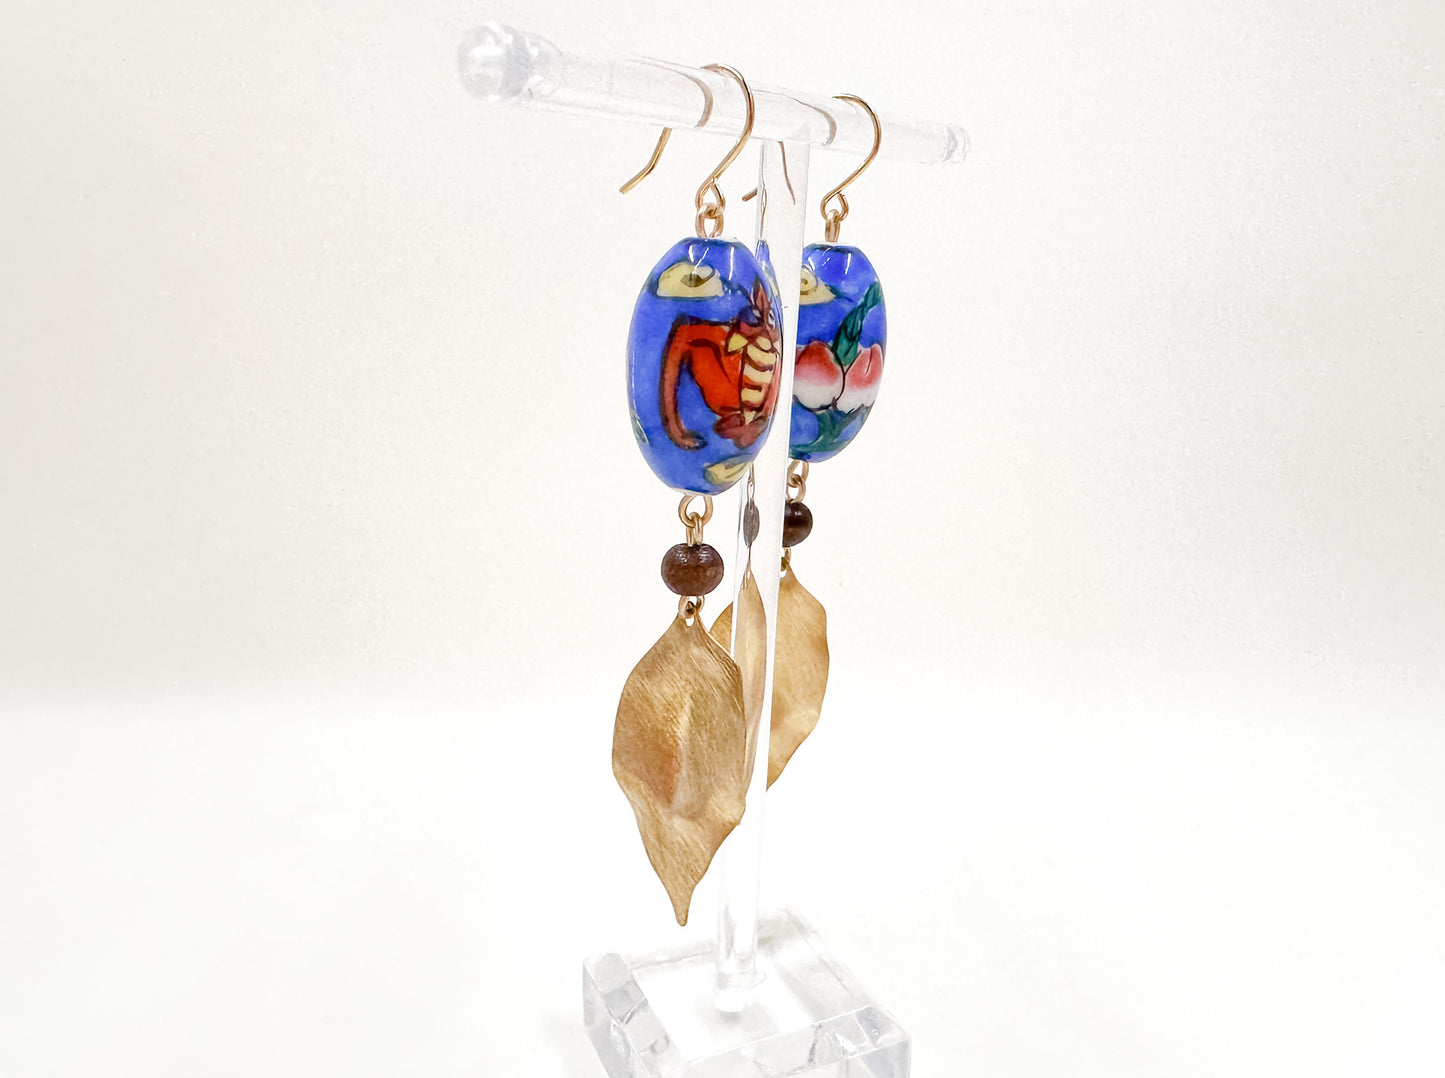 Vintage Porcelain Hand Painted Bead Earrings with Dragons and Brushed Brass Leaves